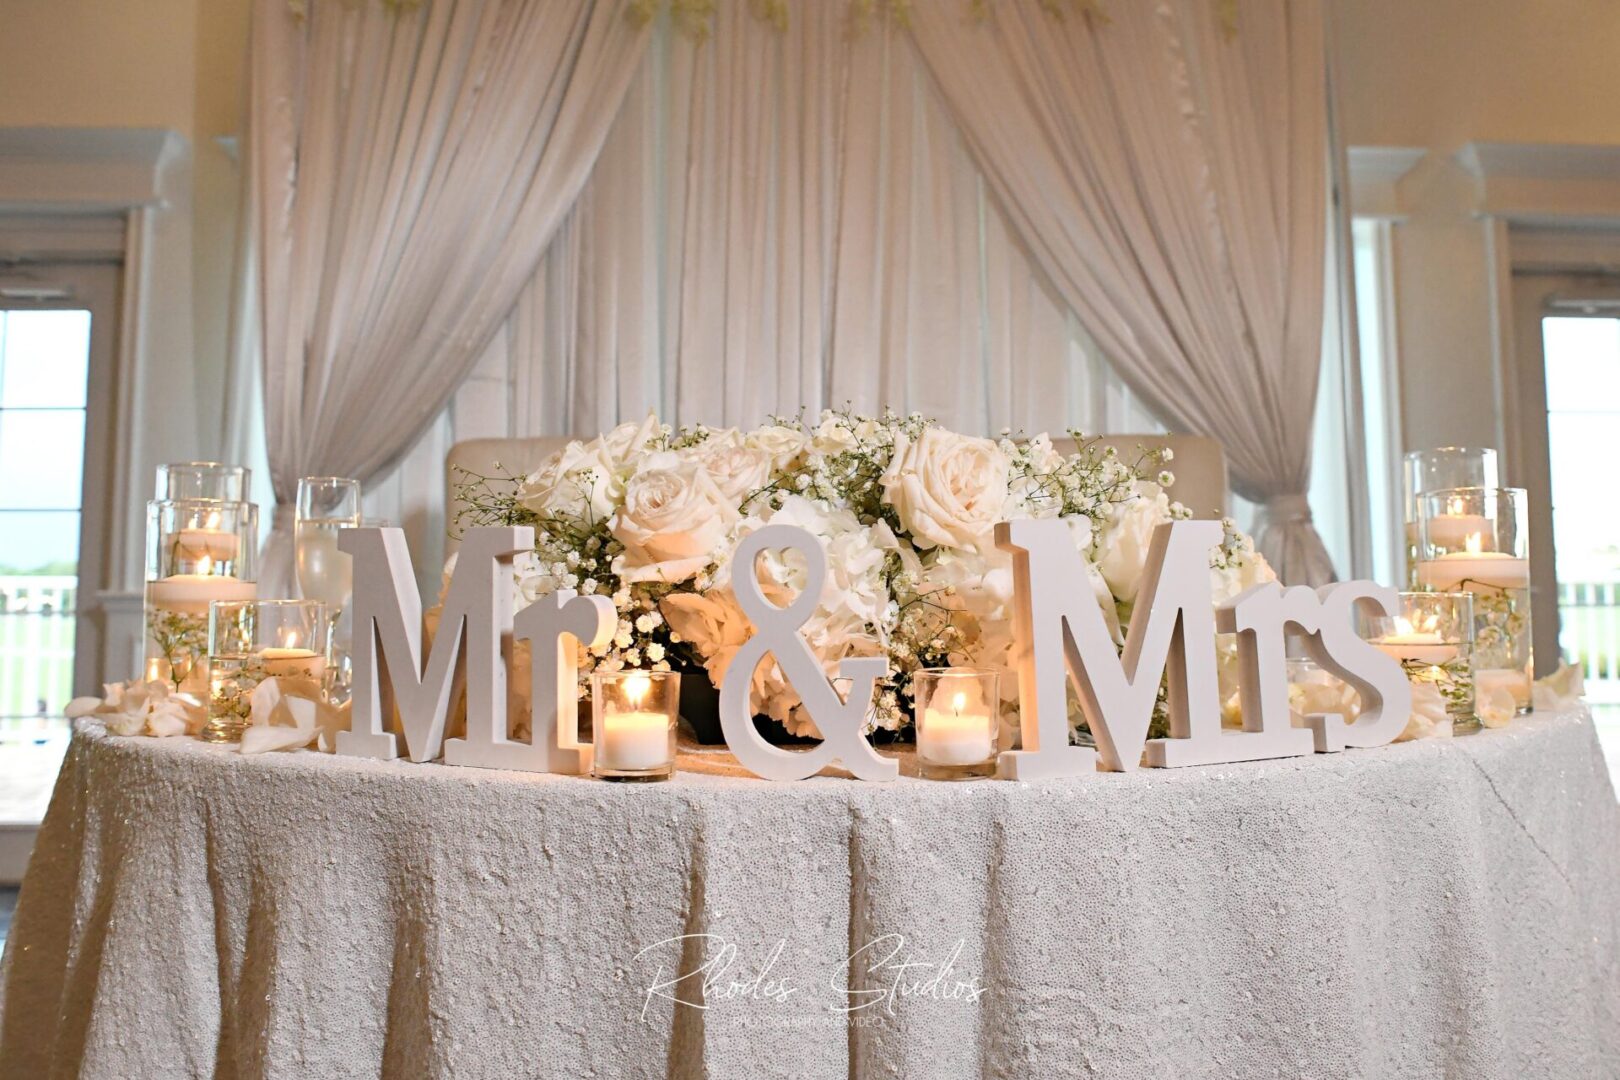 A Mr and Mrs Arrangement on a White Color Table